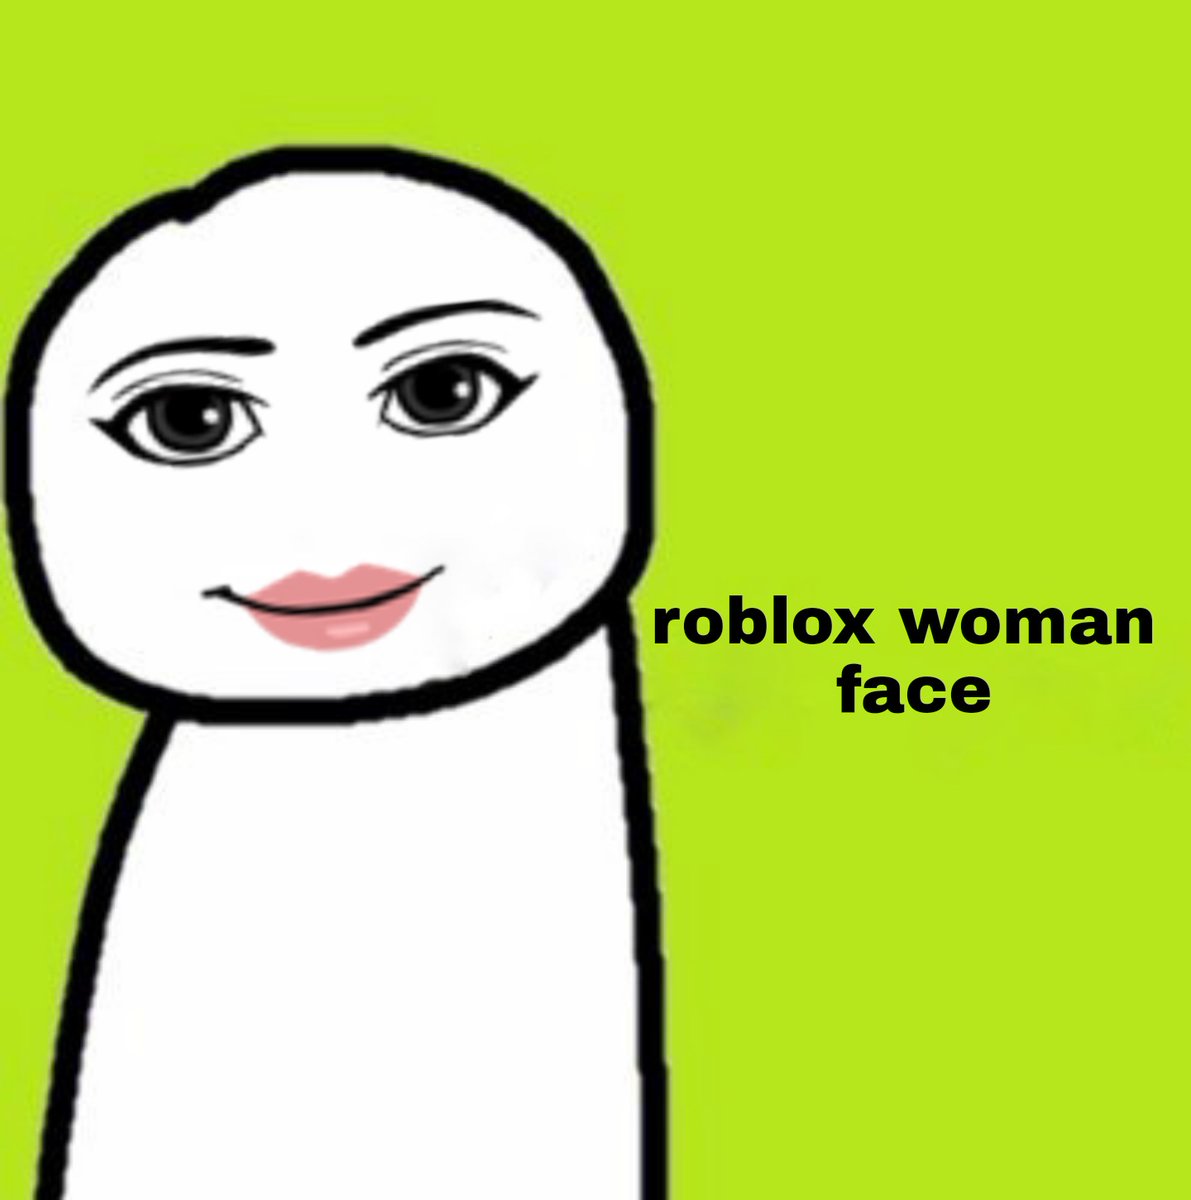 Roblox Woman Face, Object Shows Community